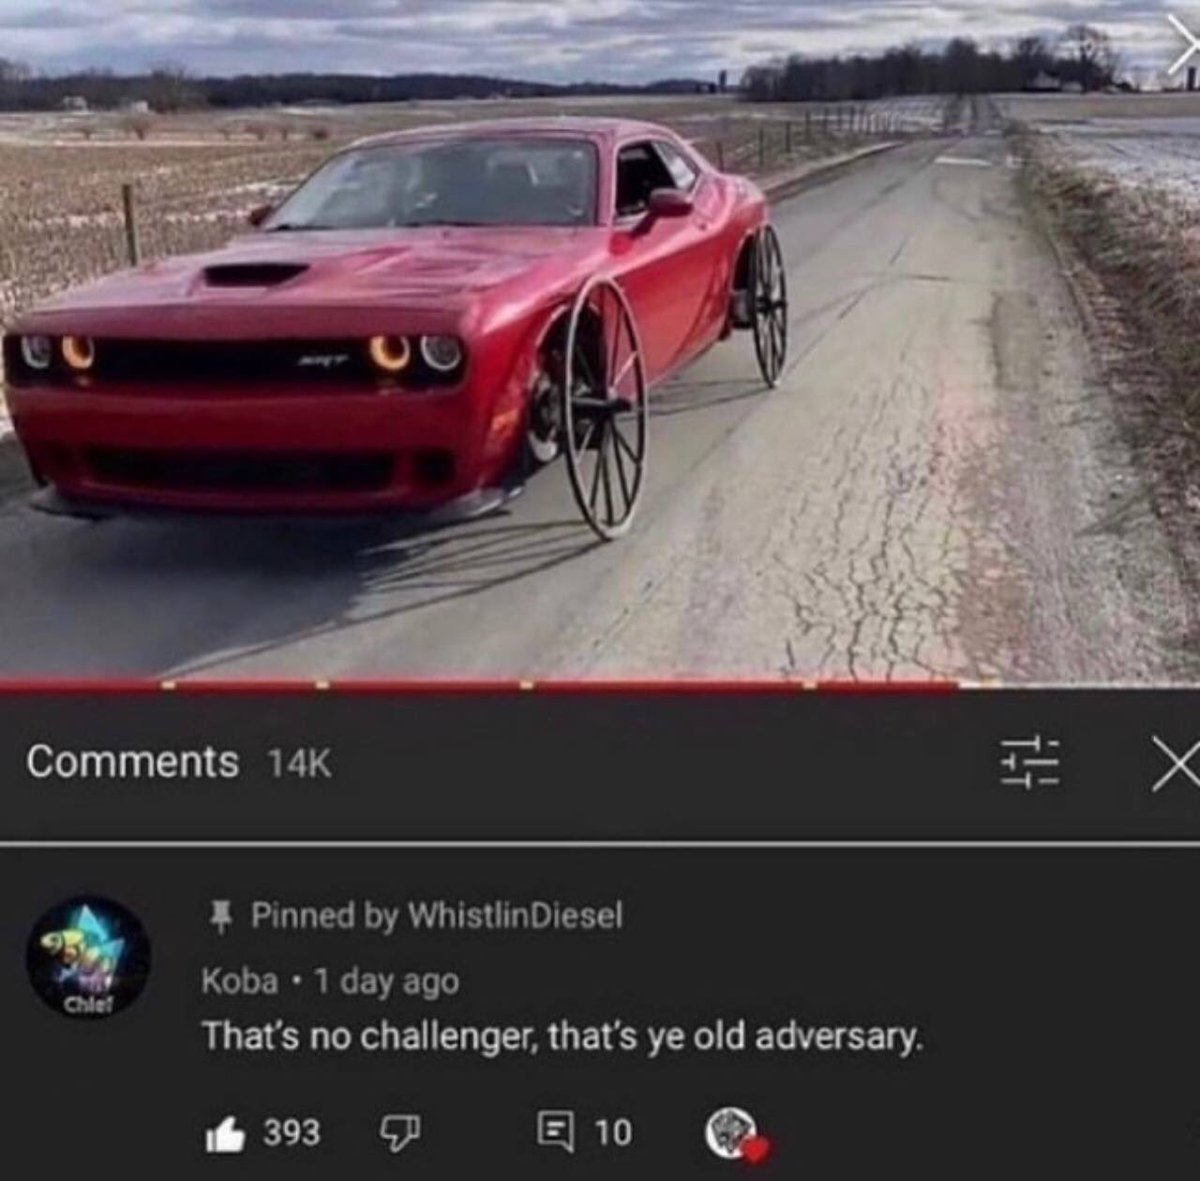 insane youtube comments - ye old adversary - 14K Chlef Pinned by Whistlin Diesel Koba 1 day ago That's no challenger, that's ye old adversary. 10 393 X